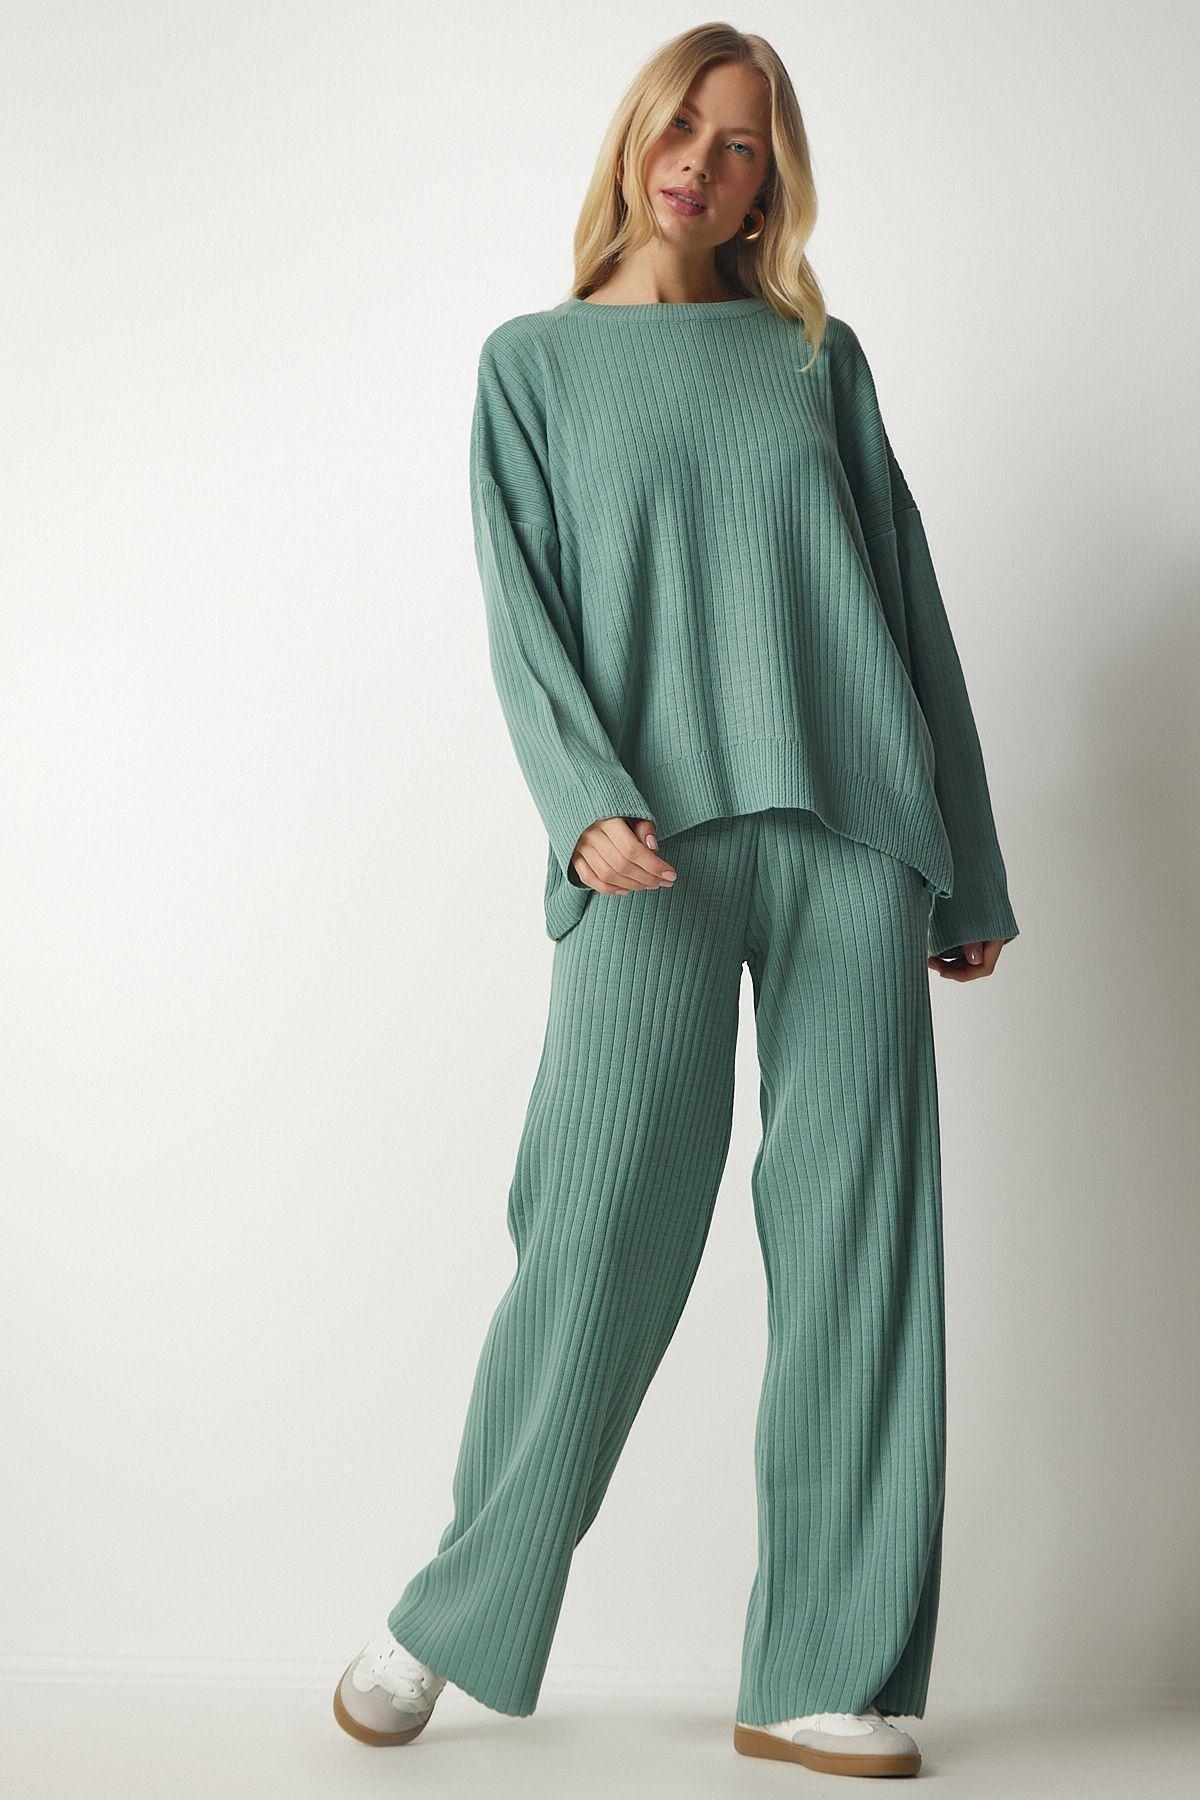 Happiness Istanbul - Turquoise Knitwear Sweater Pants Suit